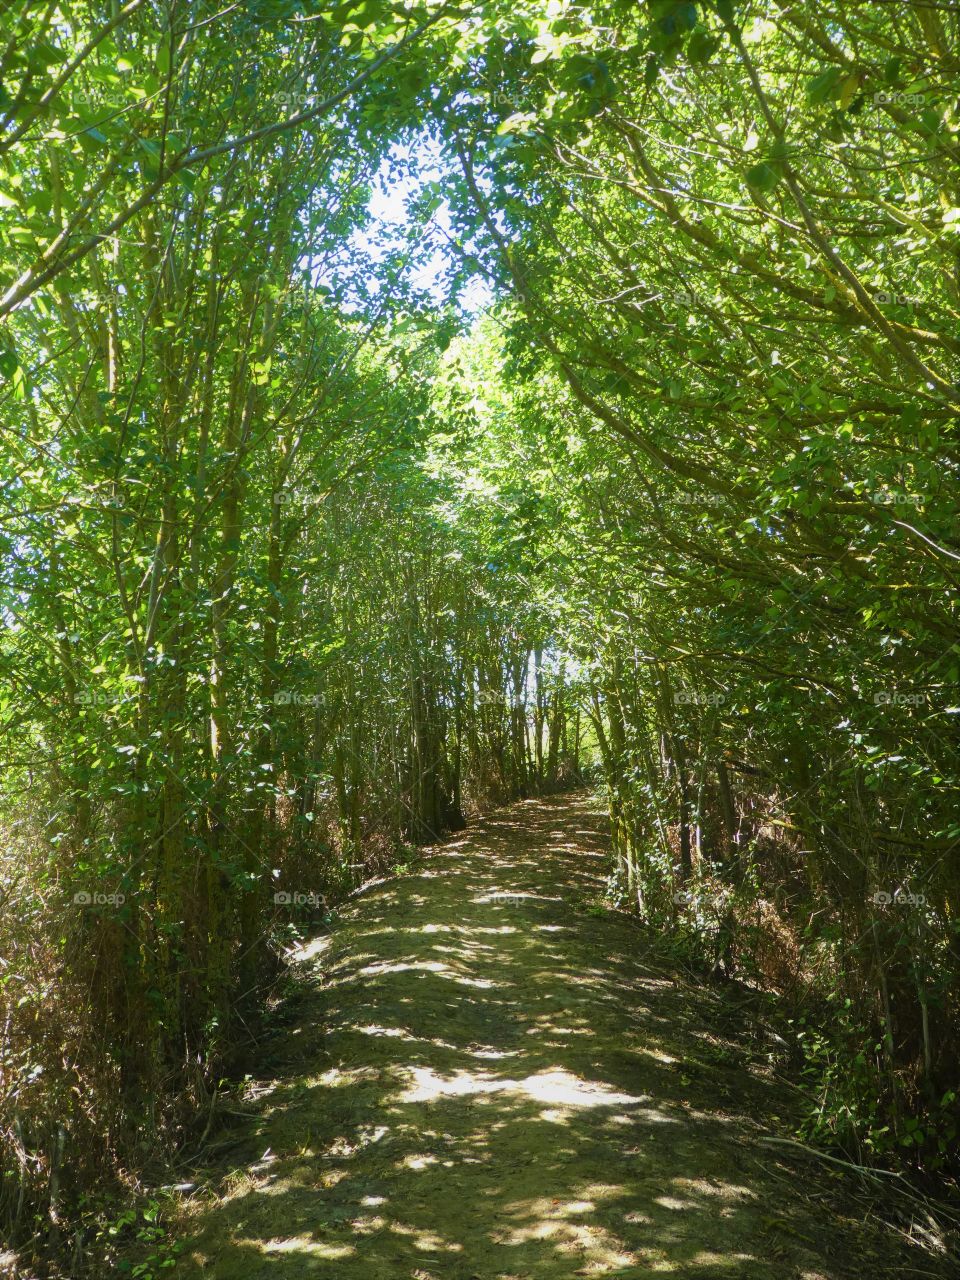 dirt road between green trees in a nature reserve in France, in summer